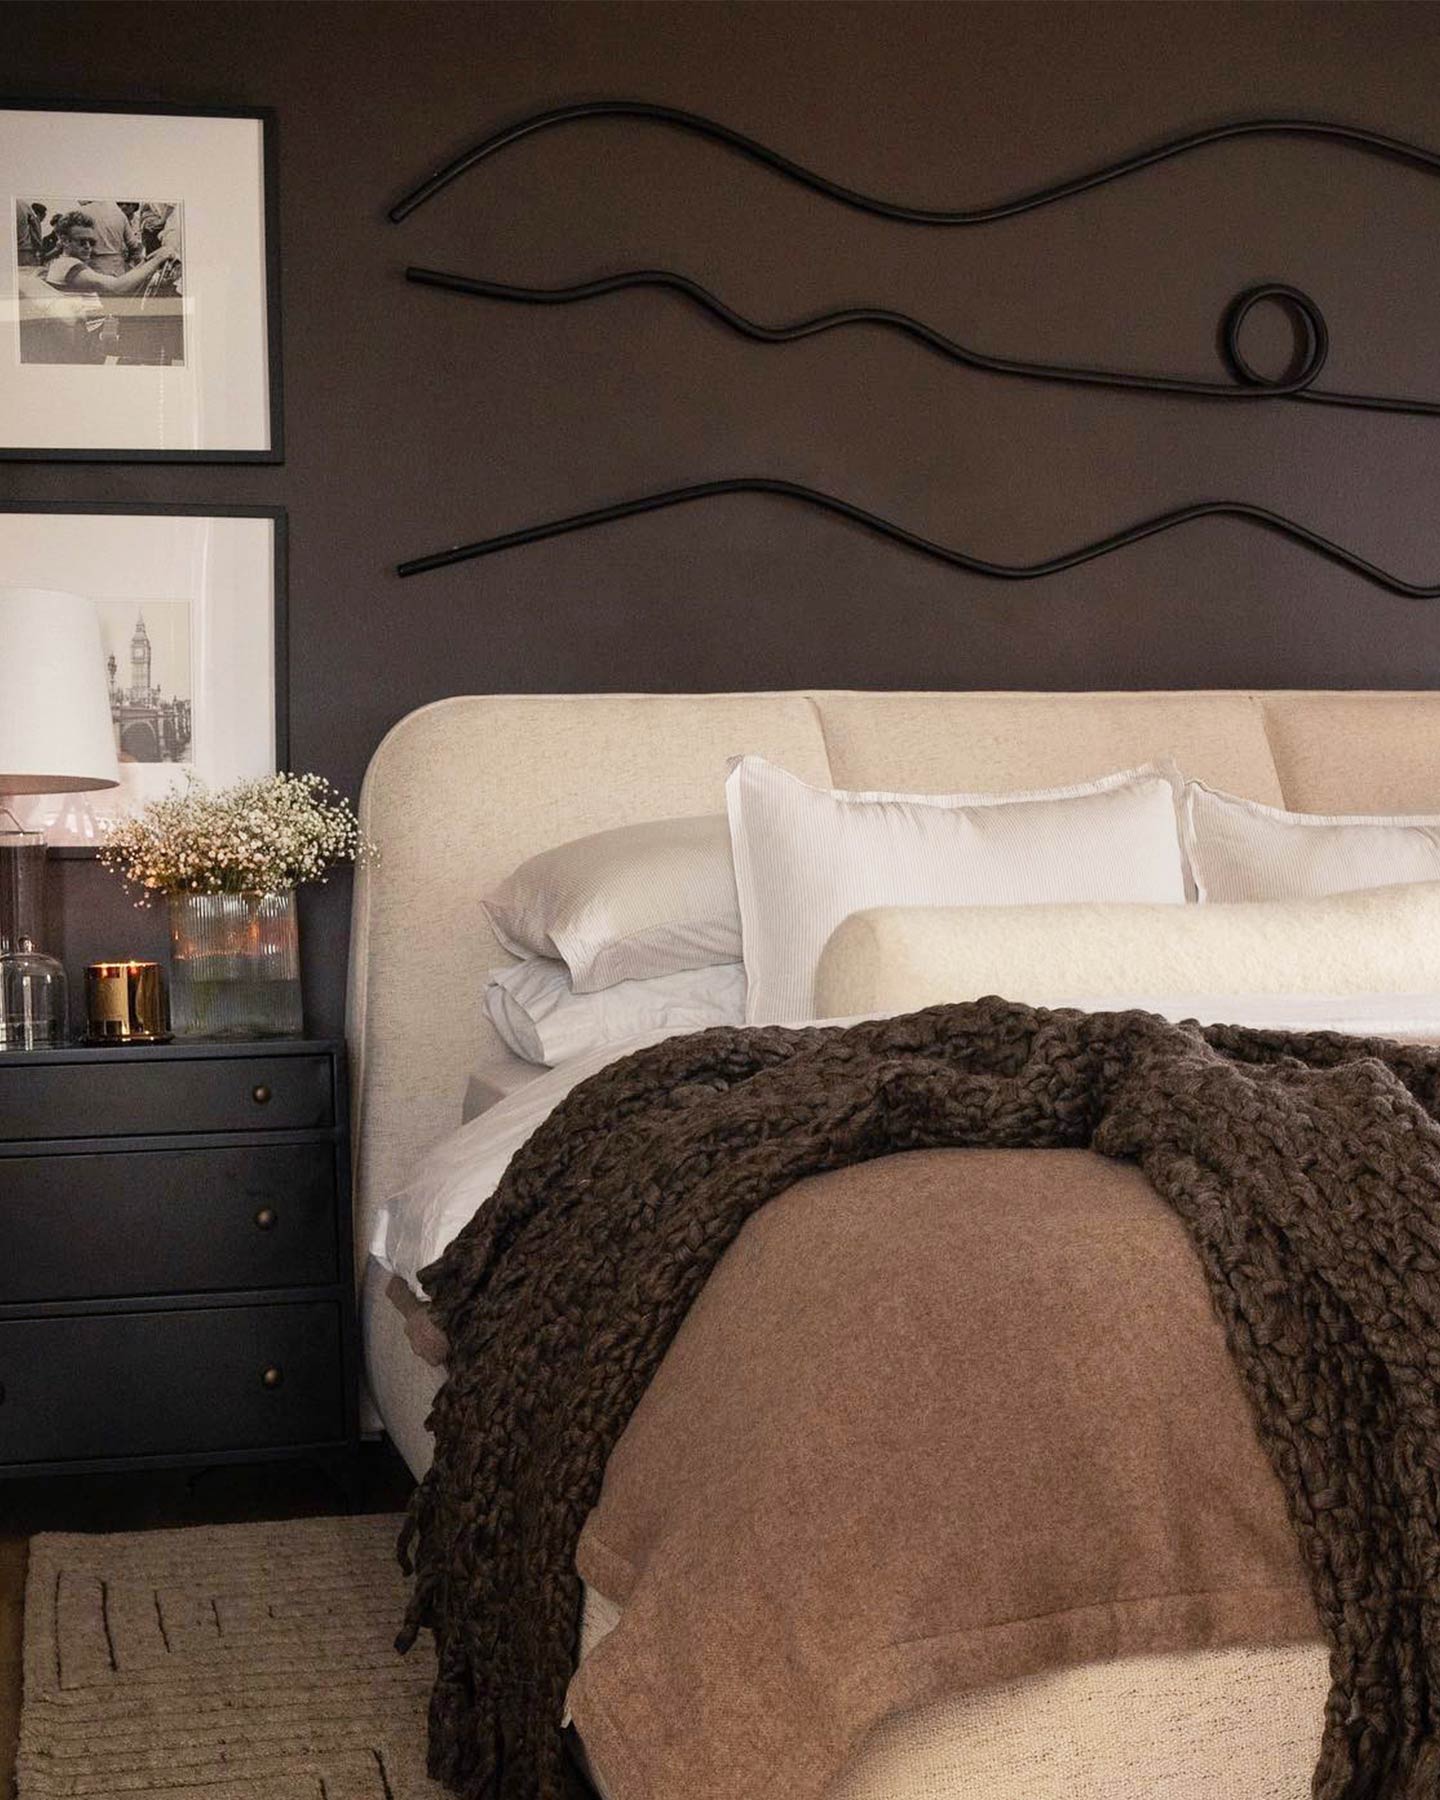 Coffee Date is perhaps the coziest option out of all the bedroom paint colors.